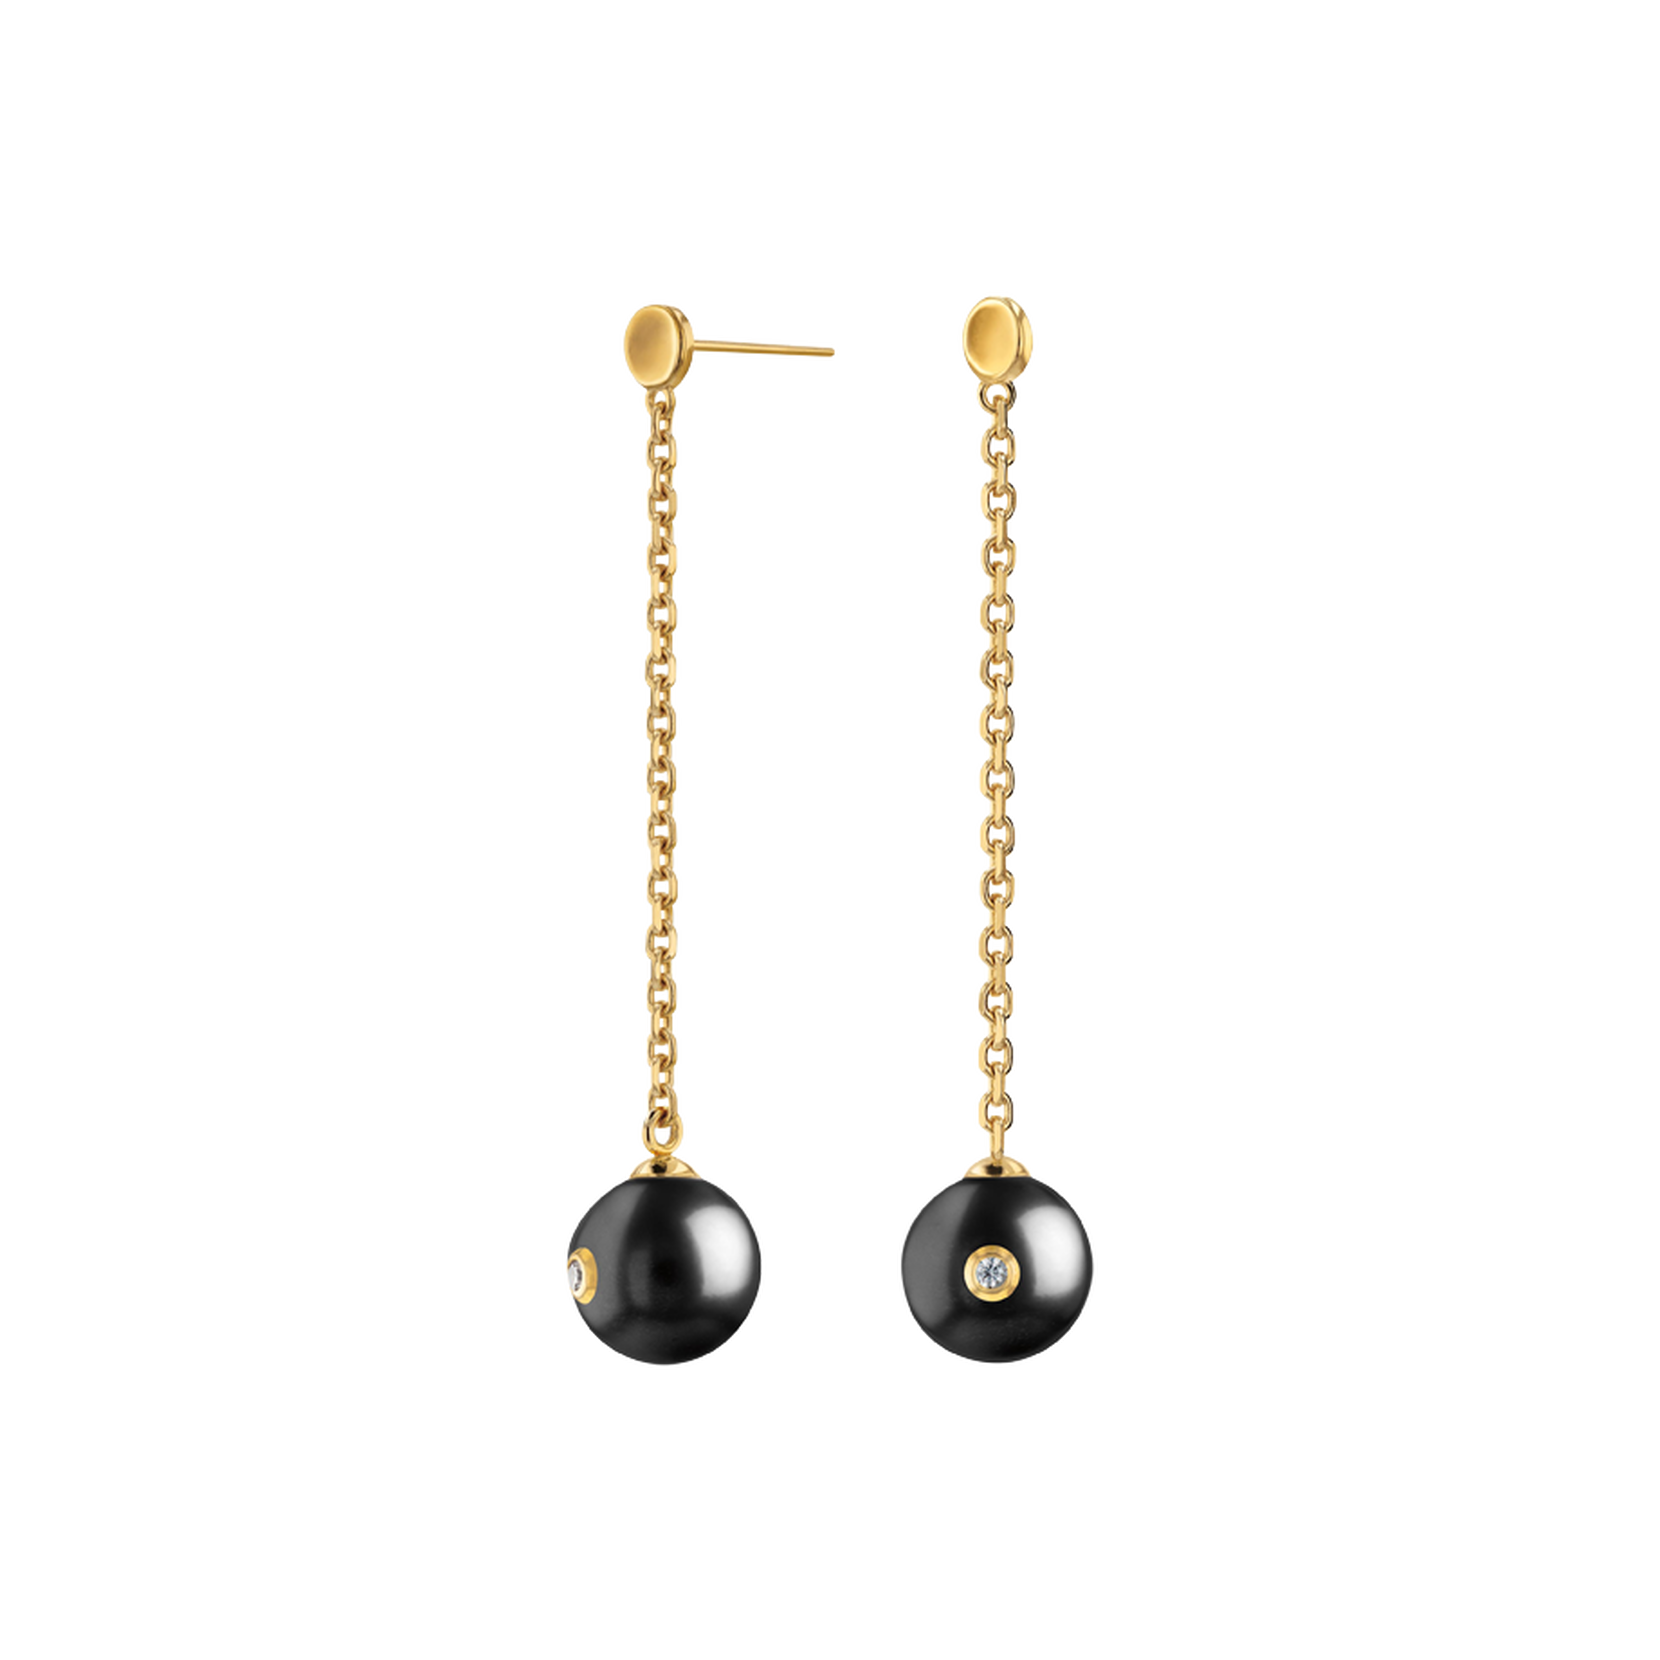 Ziegfeld Collection Drop Earrings in Sterling Silver with Pearls